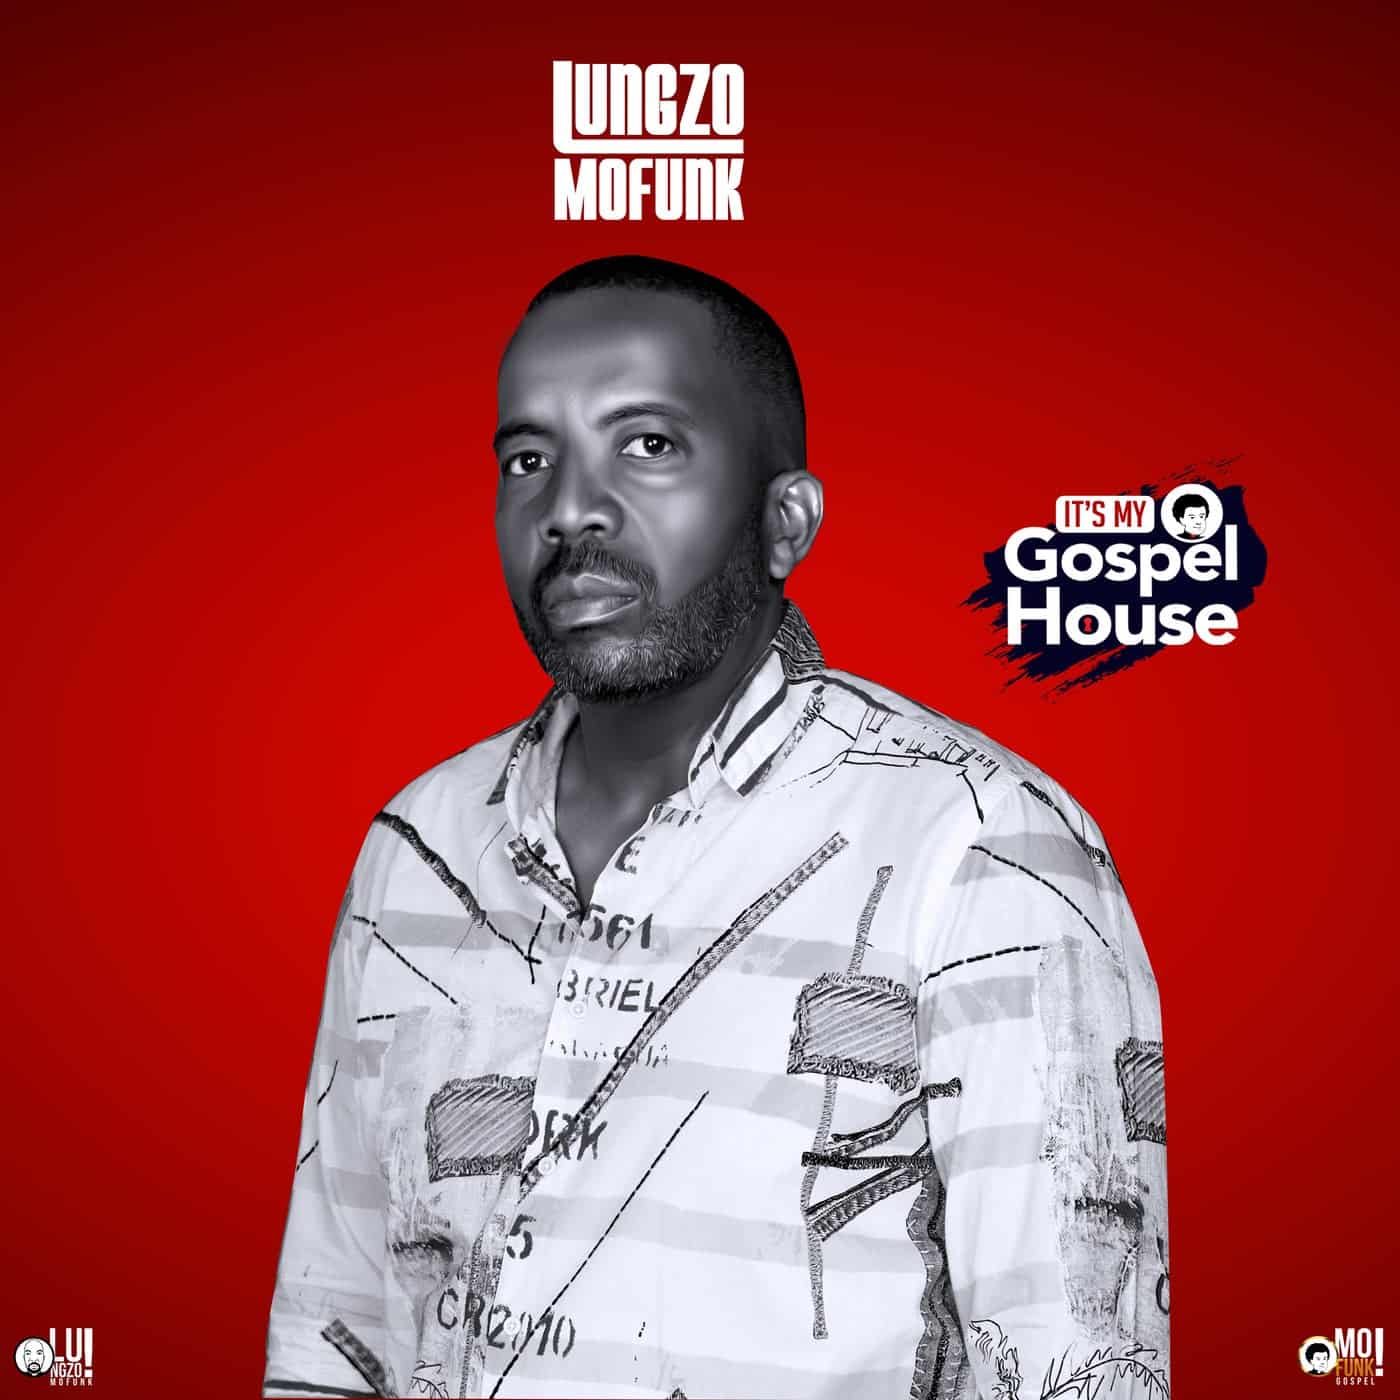 image cover: Lungzo Mofunk - It's My Gospel House / MFGH003